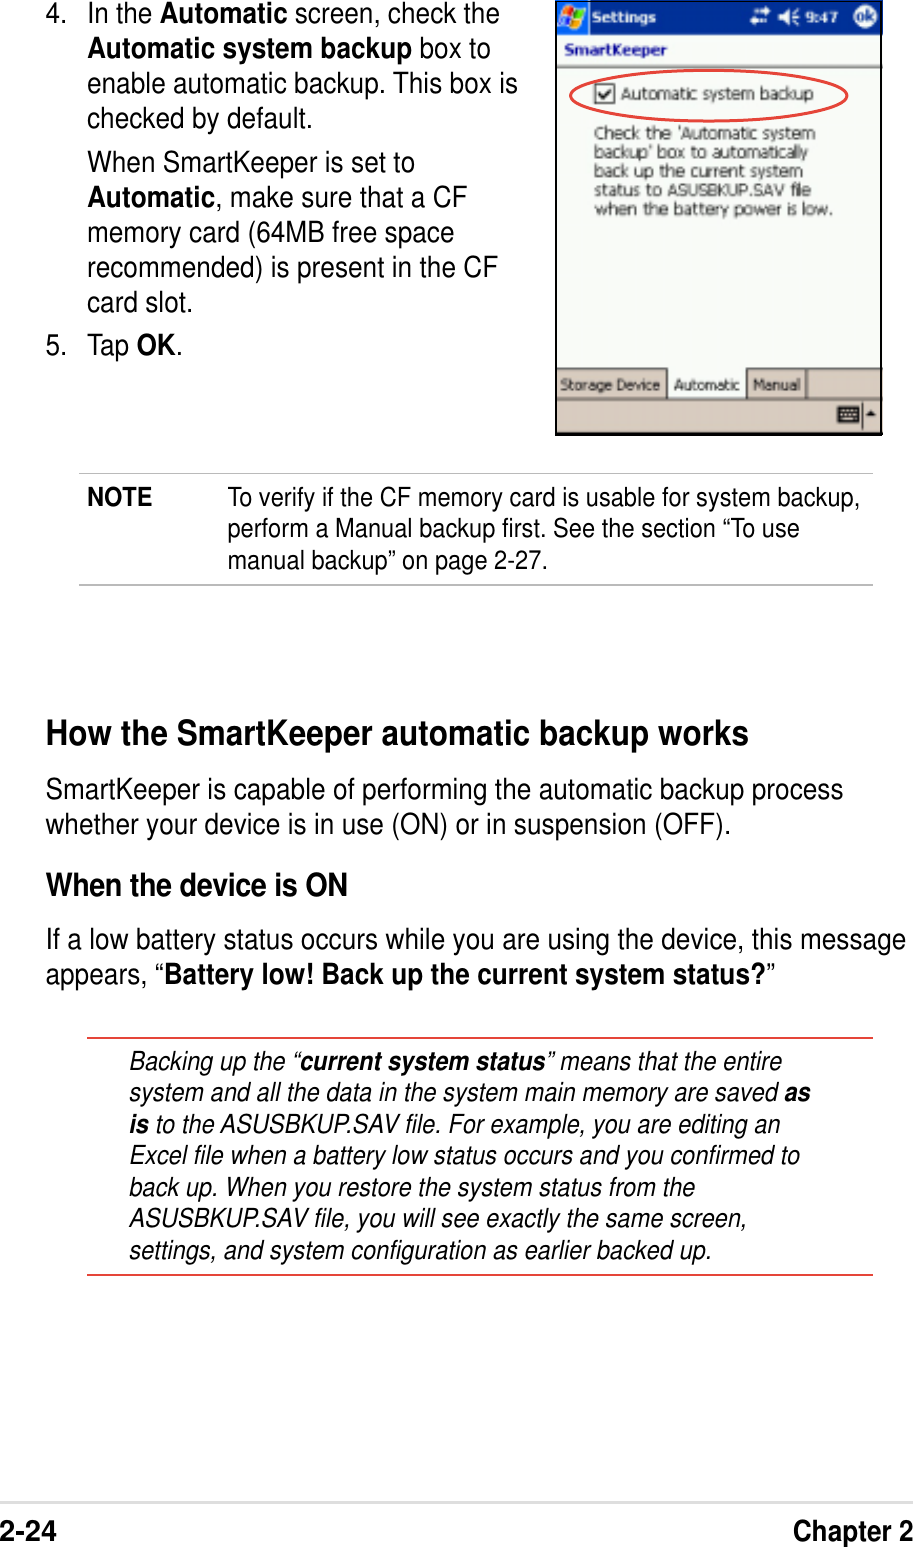 2-24Chapter 24. In the Automatic screen, check theAutomatic system backup box toenable automatic backup. This box ischecked by default.When SmartKeeper is set toAutomatic, make sure that a CFmemory card (64MB free spacerecommended) is present in the CFcard slot.5. Tap OK.NOTE To verify if the CF memory card is usable for system backup,perform a Manual backup first. See the section “To usemanual backup” on page 2-27.How the SmartKeeper automatic backup worksSmartKeeper is capable of performing the automatic backup processwhether your device is in use (ON) or in suspension (OFF).When the device is ONIf a low battery status occurs while you are using the device, this messageappears, “Battery low! Back up the current system status?”Backing up the “current system status” means that the entiresystem and all the data in the system main memory are saved asis to the ASUSBKUP.SAV file. For example, you are editing anExcel file when a battery low status occurs and you confirmed toback up. When you restore the system status from theASUSBKUP.SAV file, you will see exactly the same screen,settings, and system configuration as earlier backed up.